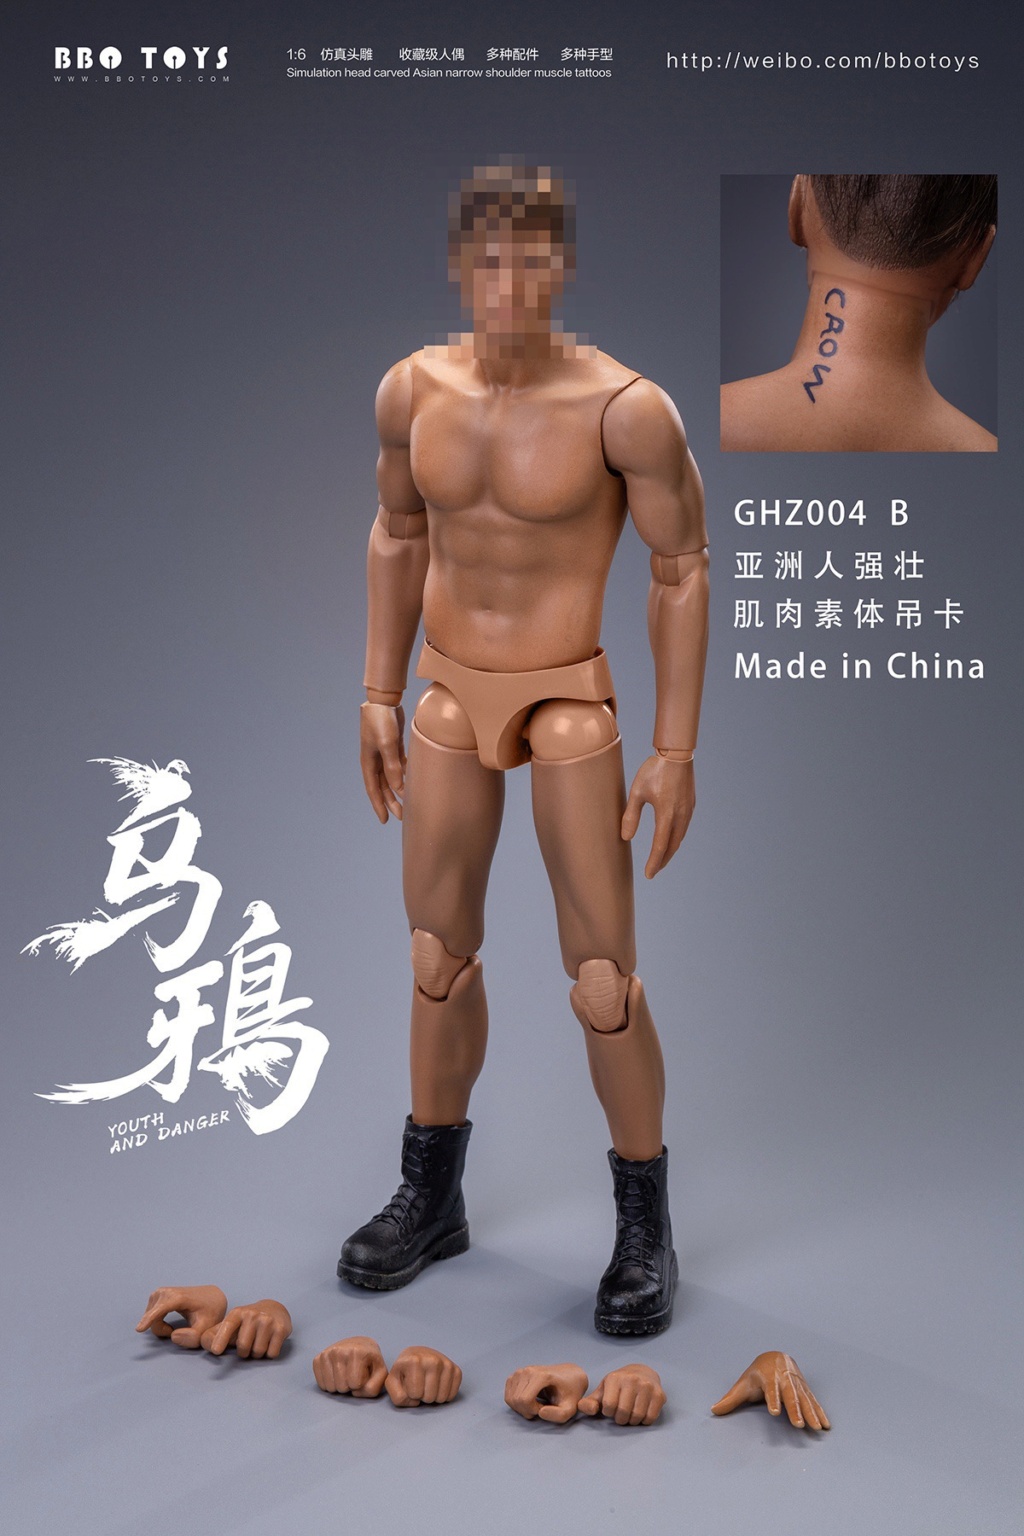 NEW PRODUCT: BBOTOYS: 1/6 Ancient and mysterious series Crow Glory GHZ004 83dae610